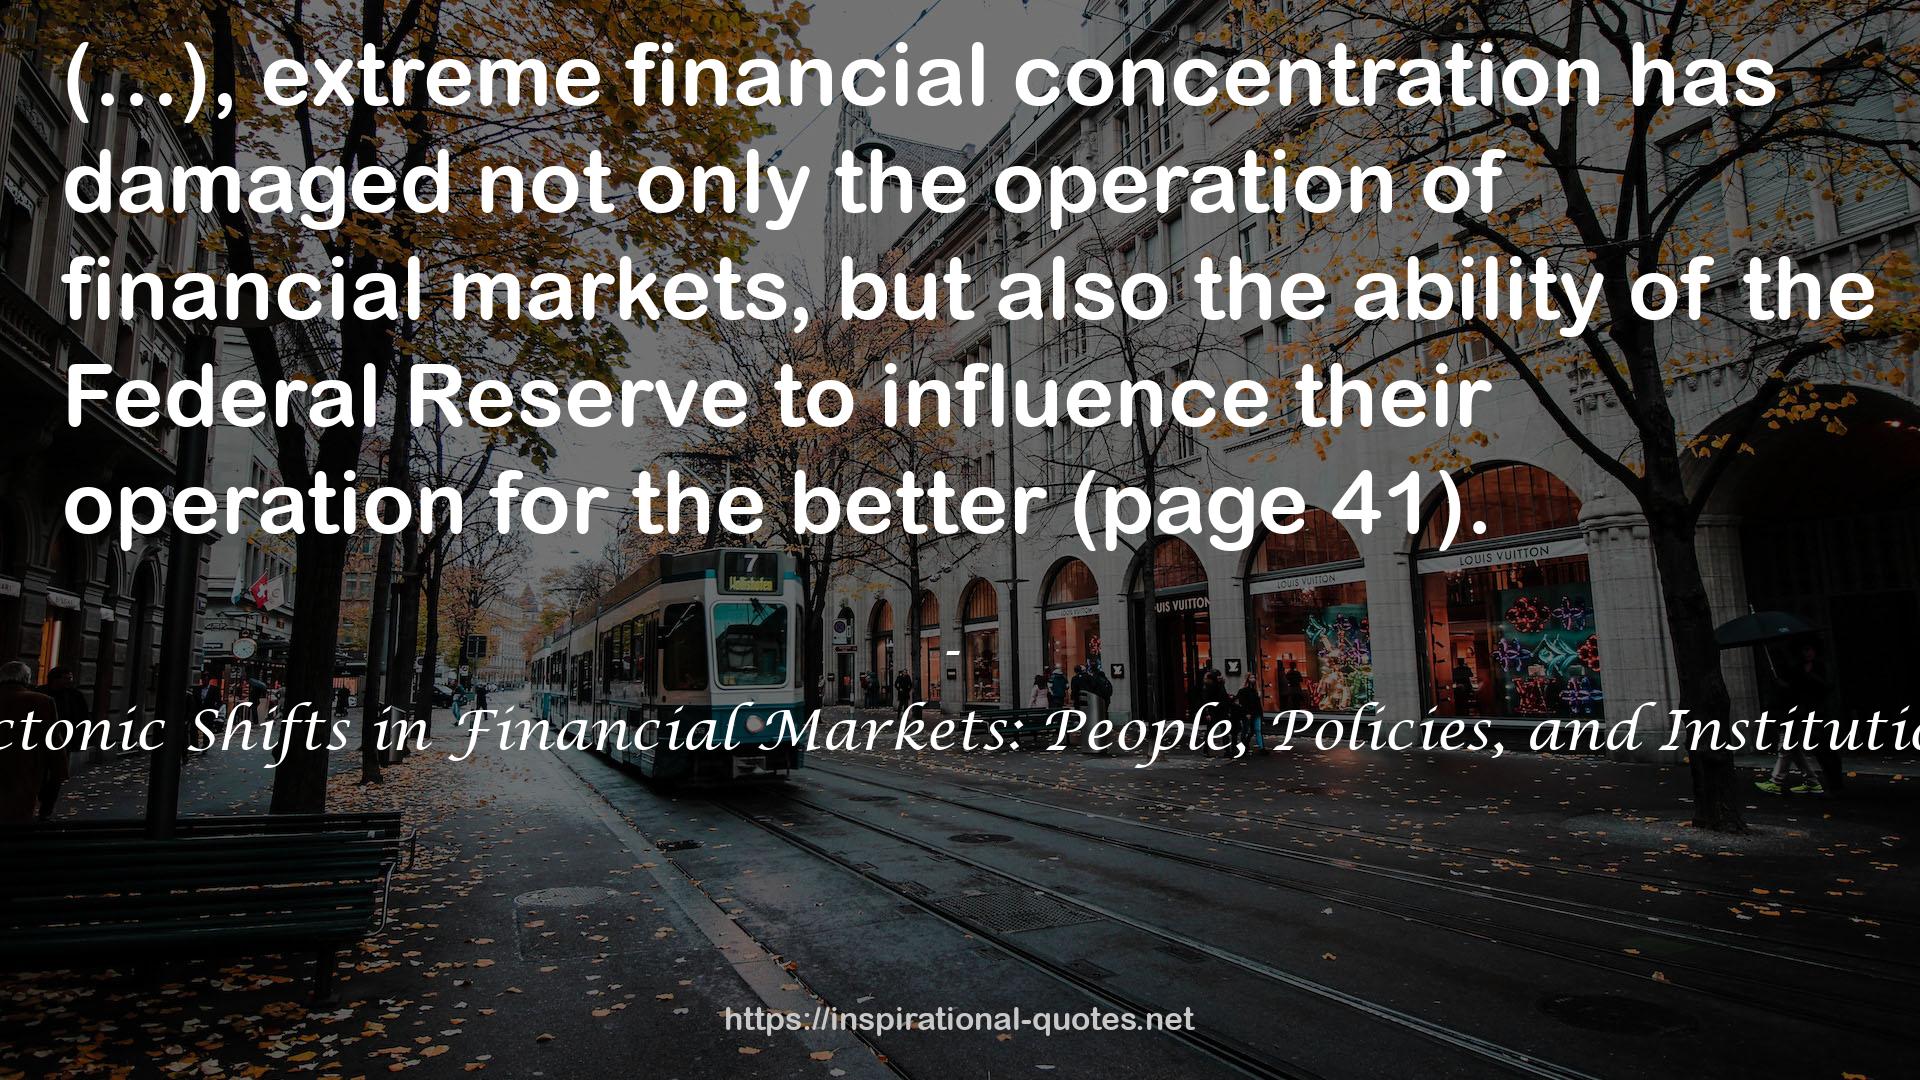 Tectonic Shifts in Financial Markets: People, Policies, and Institutions QUOTES